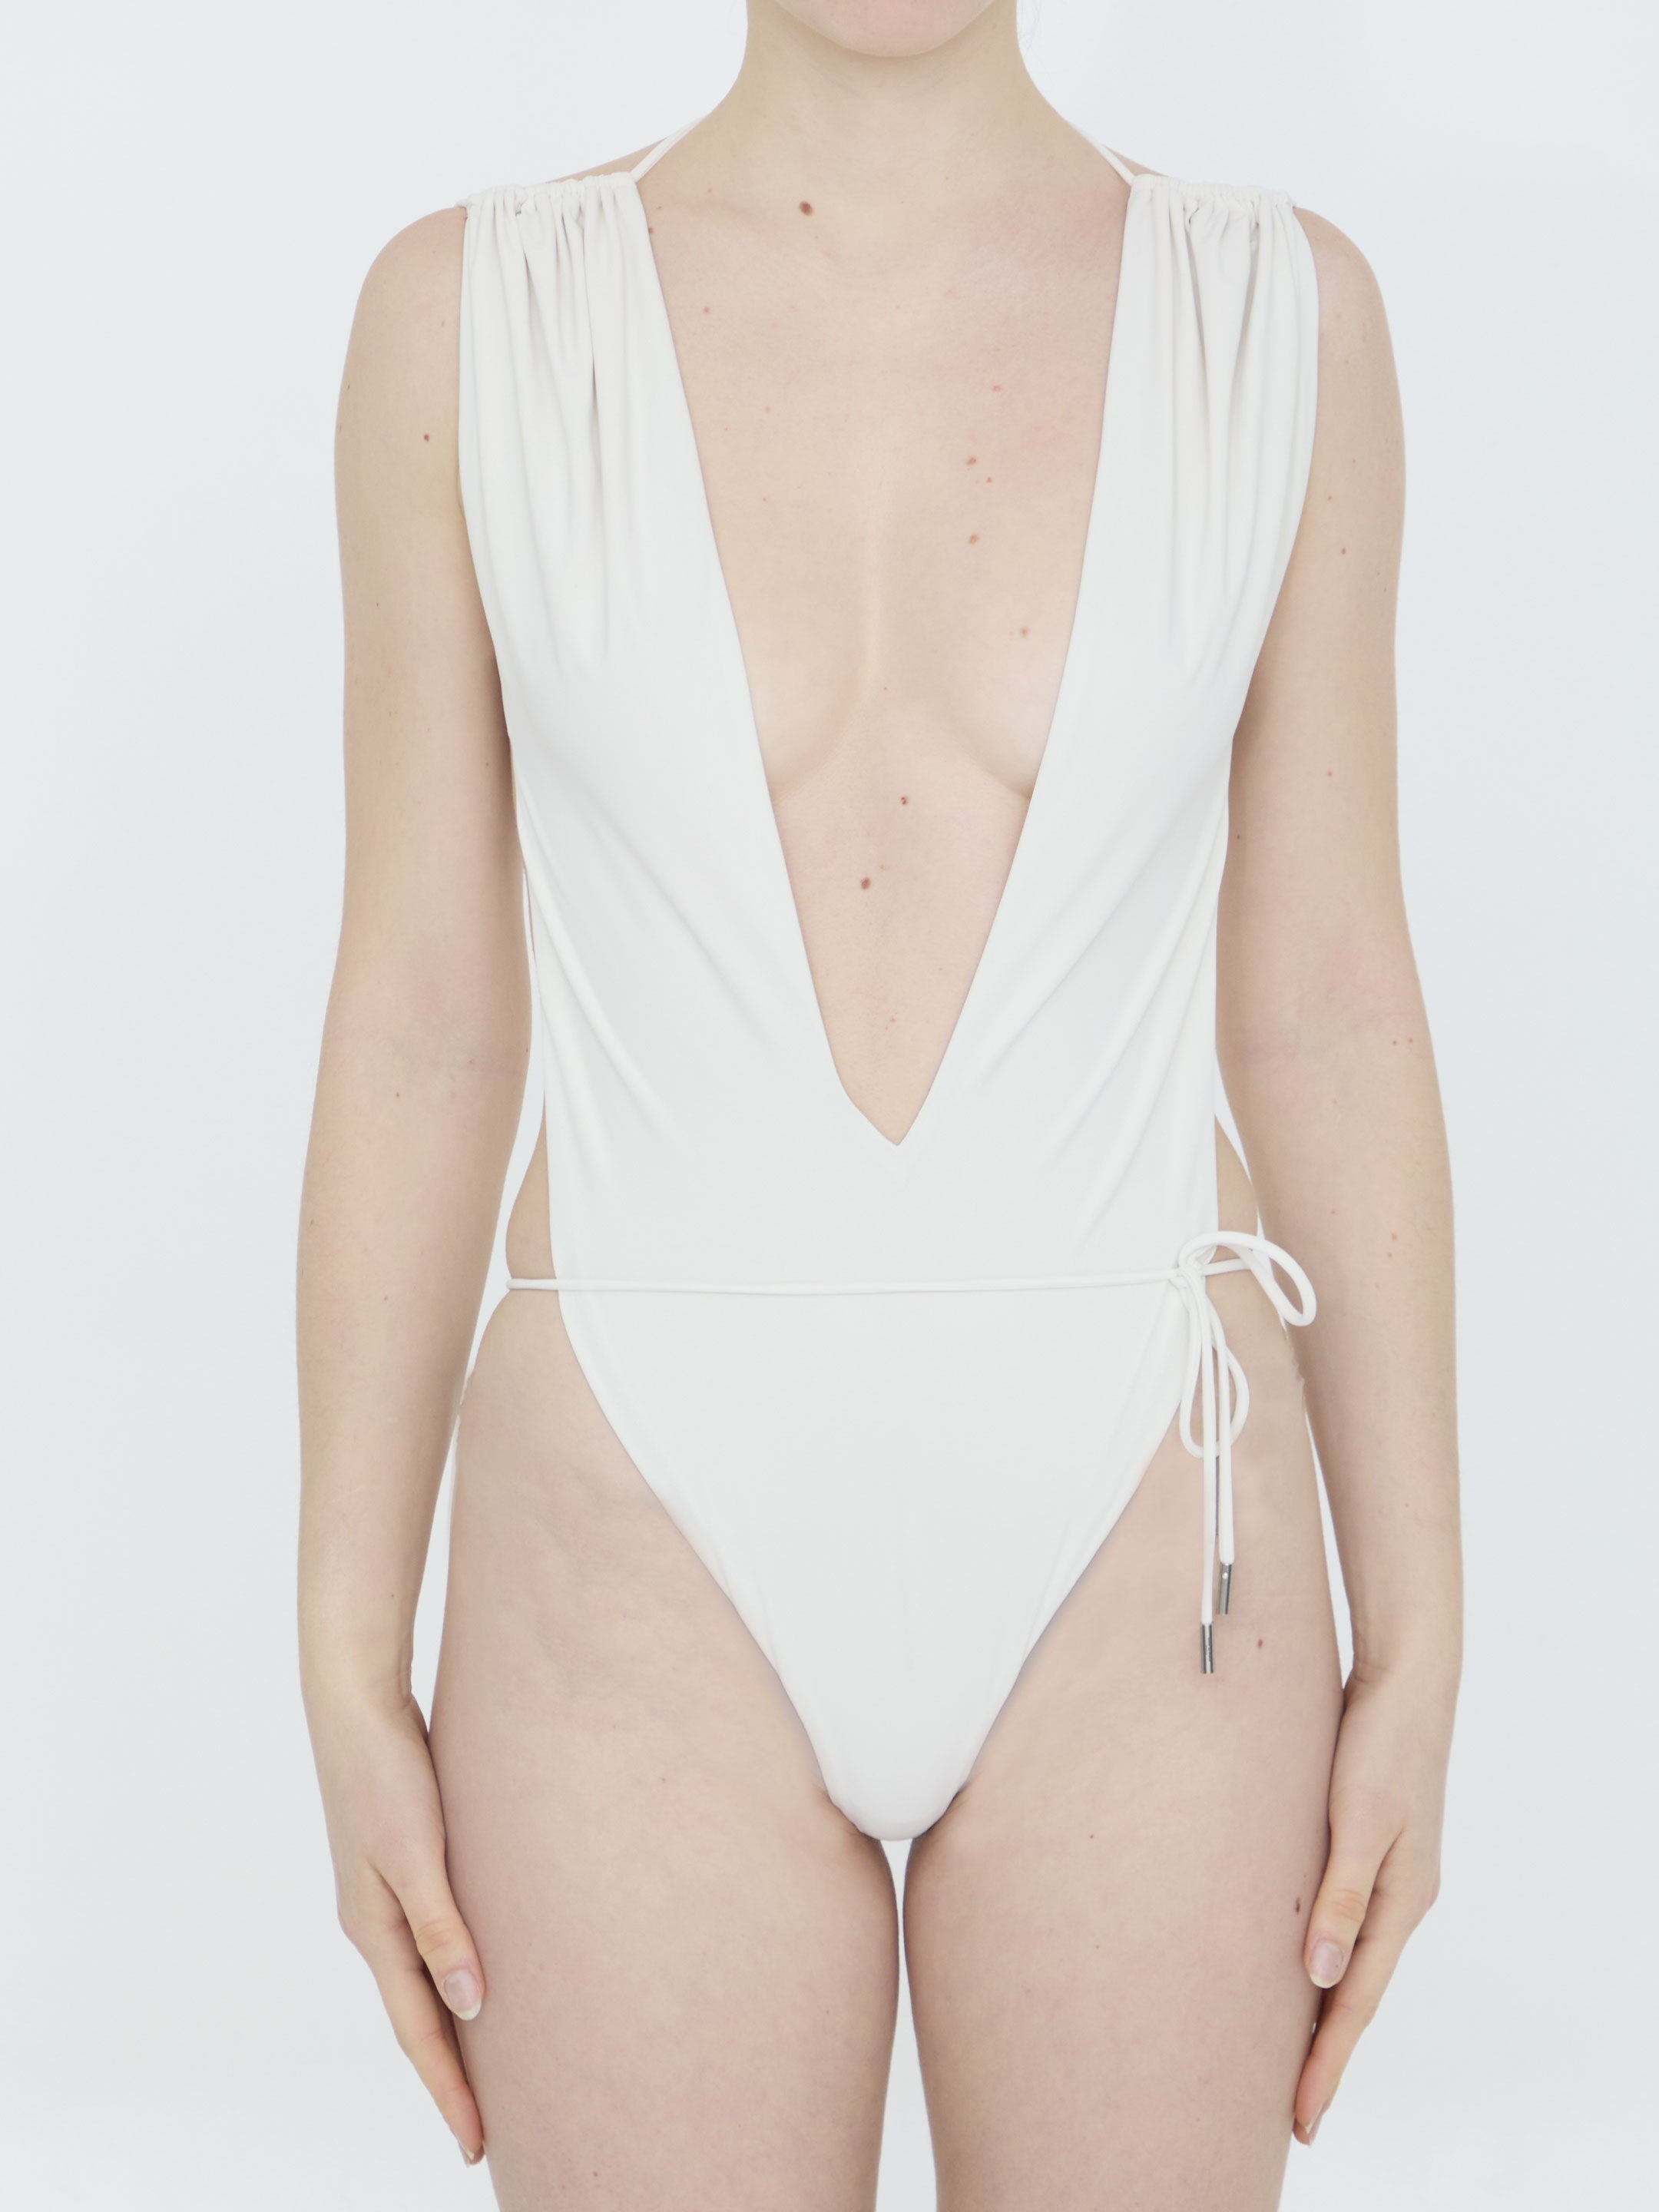 SAINT-LAURENT-OUTLET-SALE-One-piece-swimsuit-Badebekleidung-M-WHITE-ARCHIVE-COLLECTION.jpg